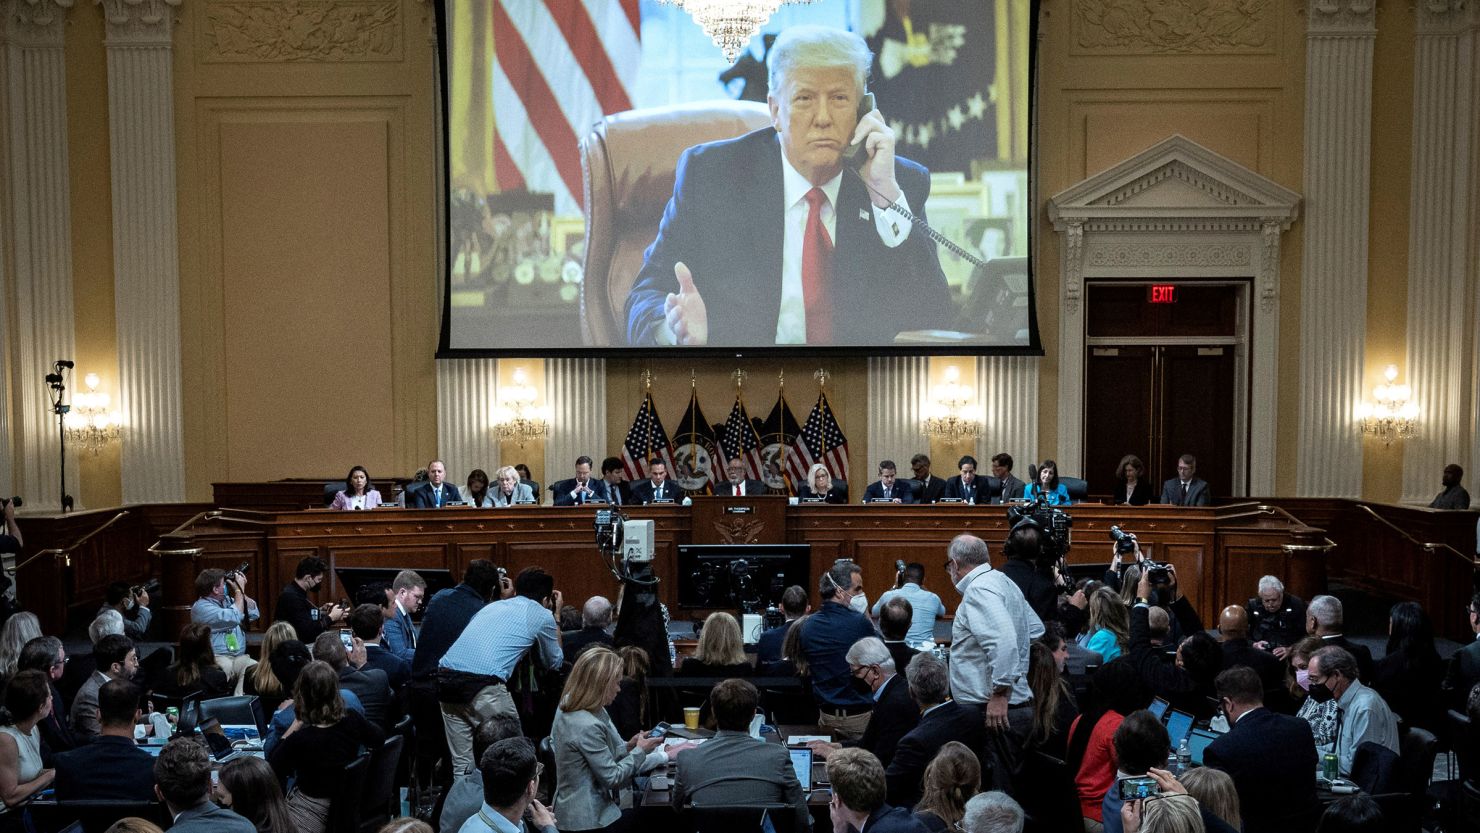 In this June 2022 photo, an image of former President Donald Trump is displayed during the third hearing of the House Select Committee to Investigate the January 6 Attack on the US Capitol in Washington, DC.